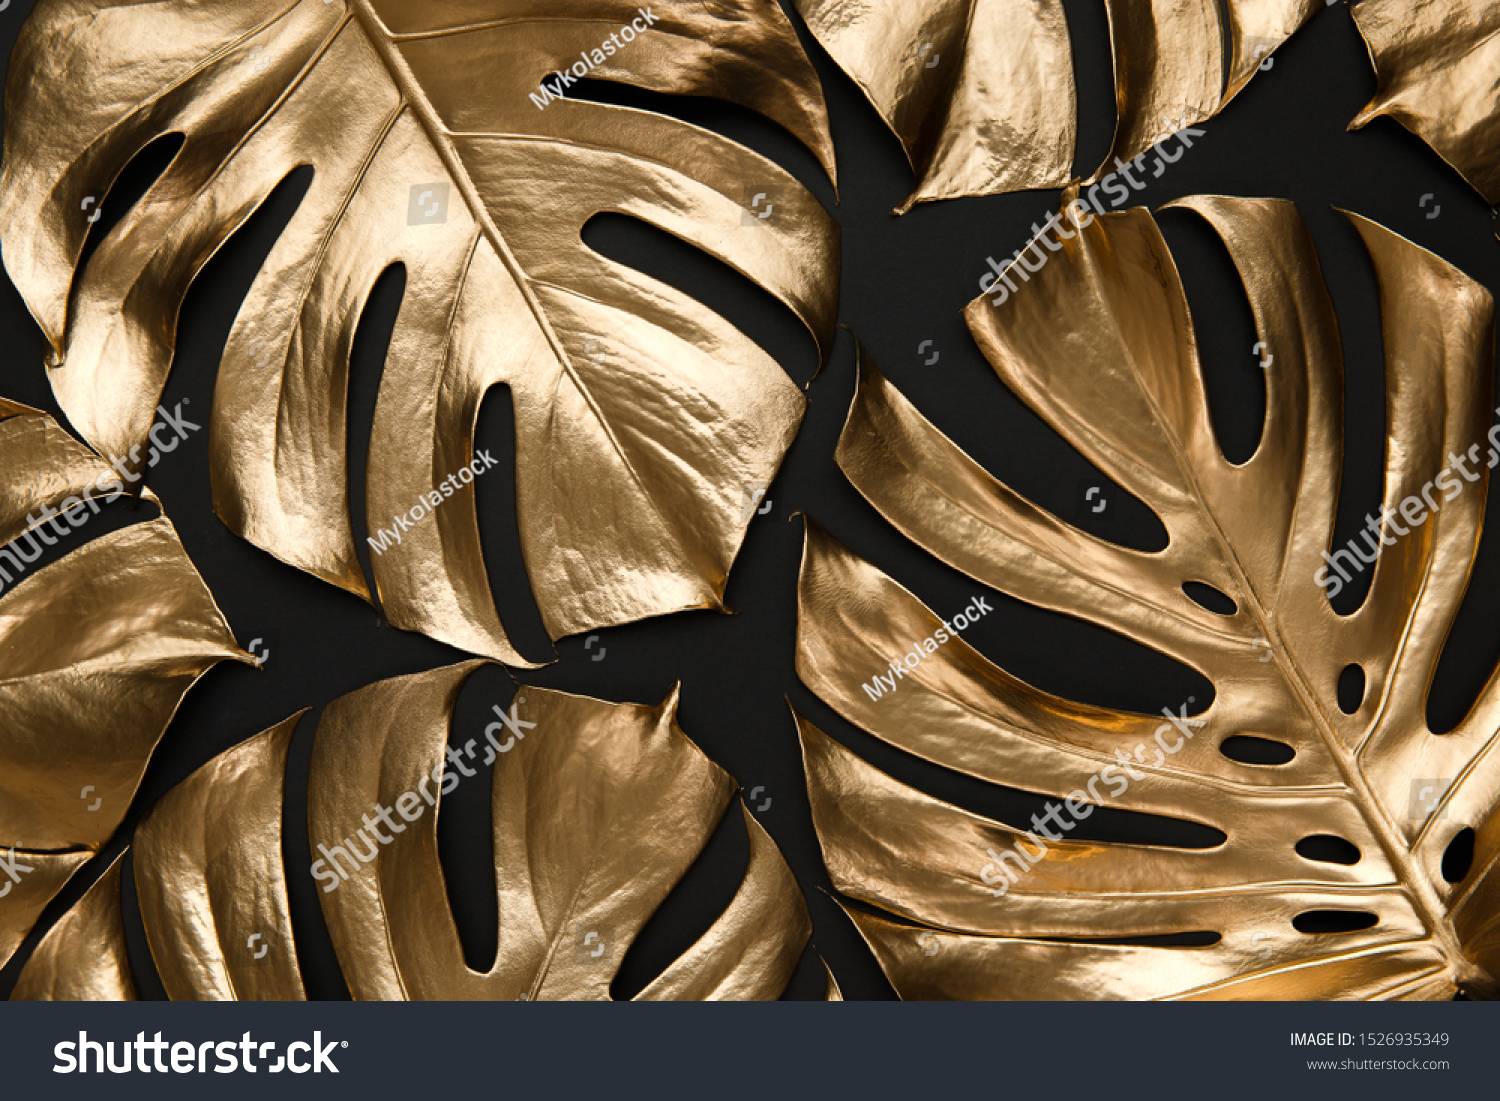 Tropical monstera leaves creatively arranged on black background. Trendy luxury fashion pattern design. Natural botany floral composition.